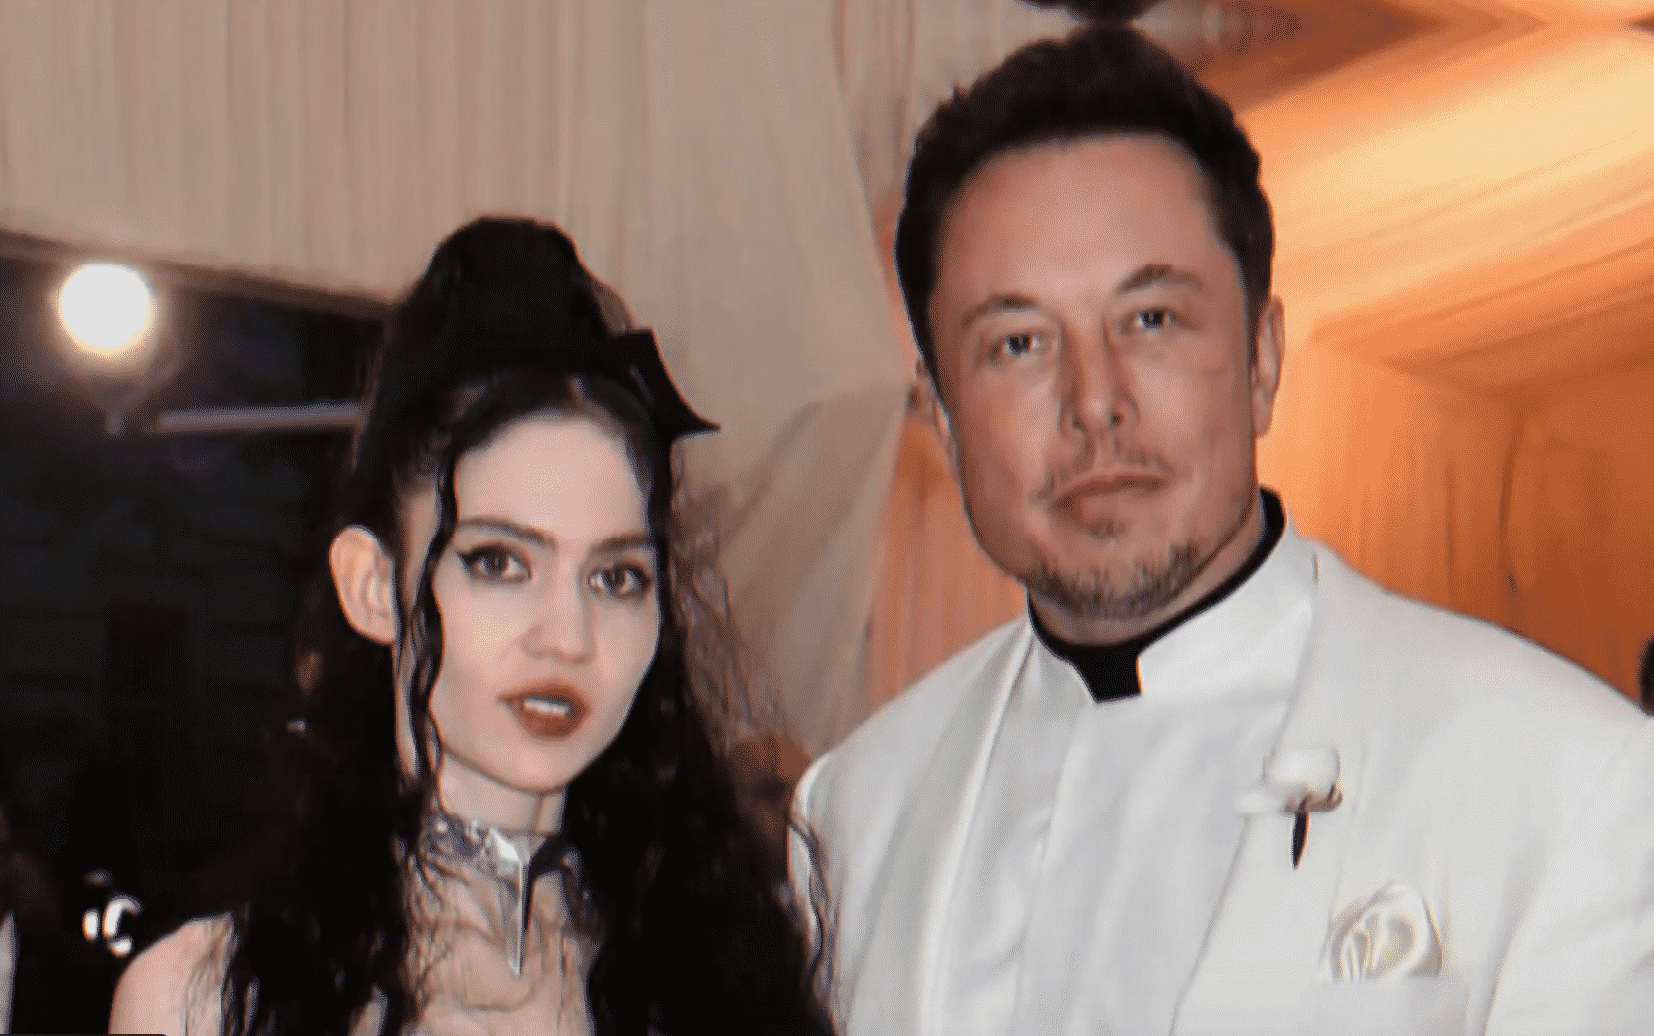 Musk and Grimes